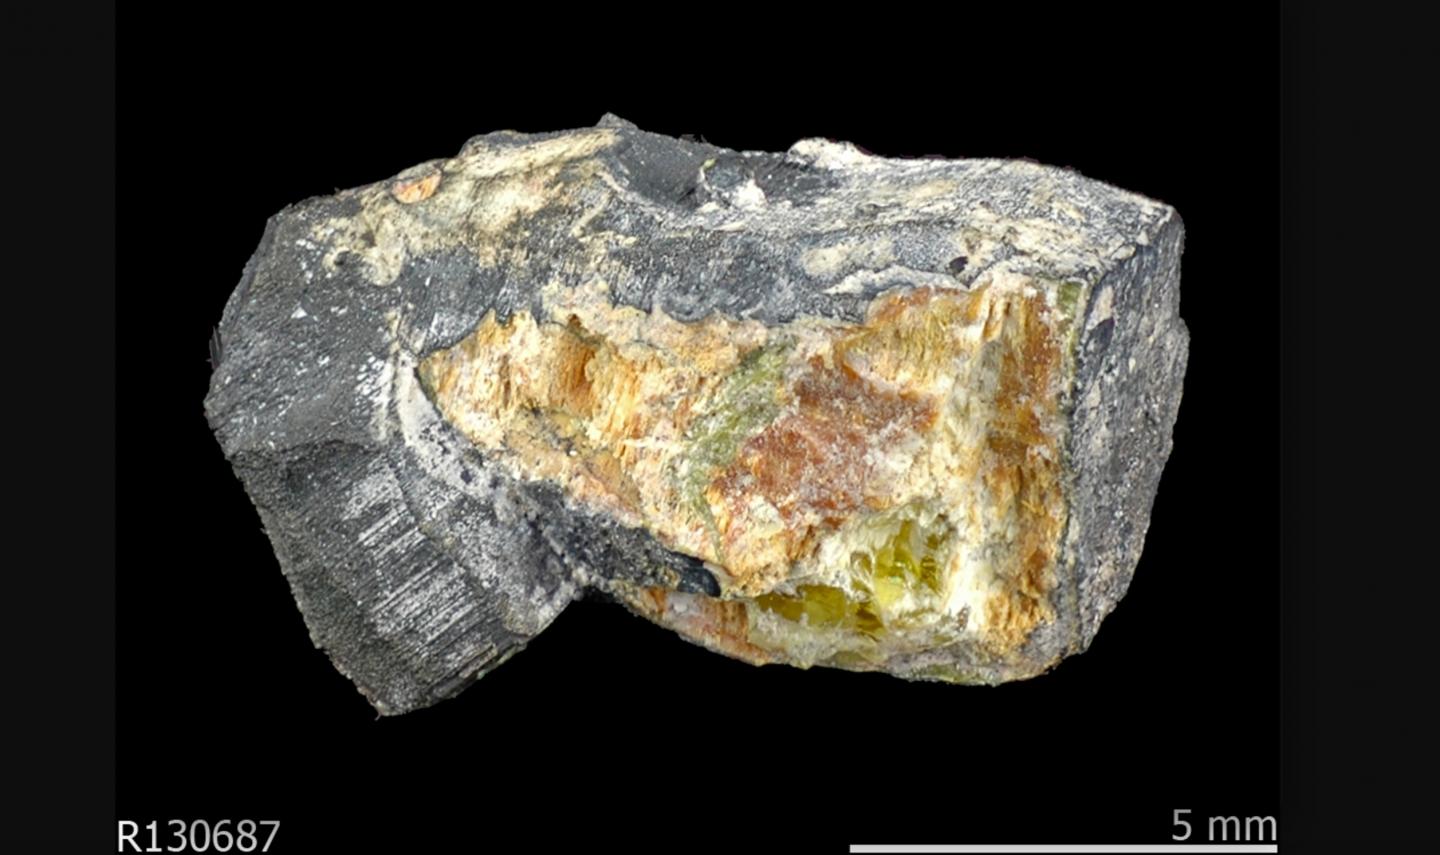 Parisite-(La): A New-To-Science Mineral Predicted by Big Data Analysis